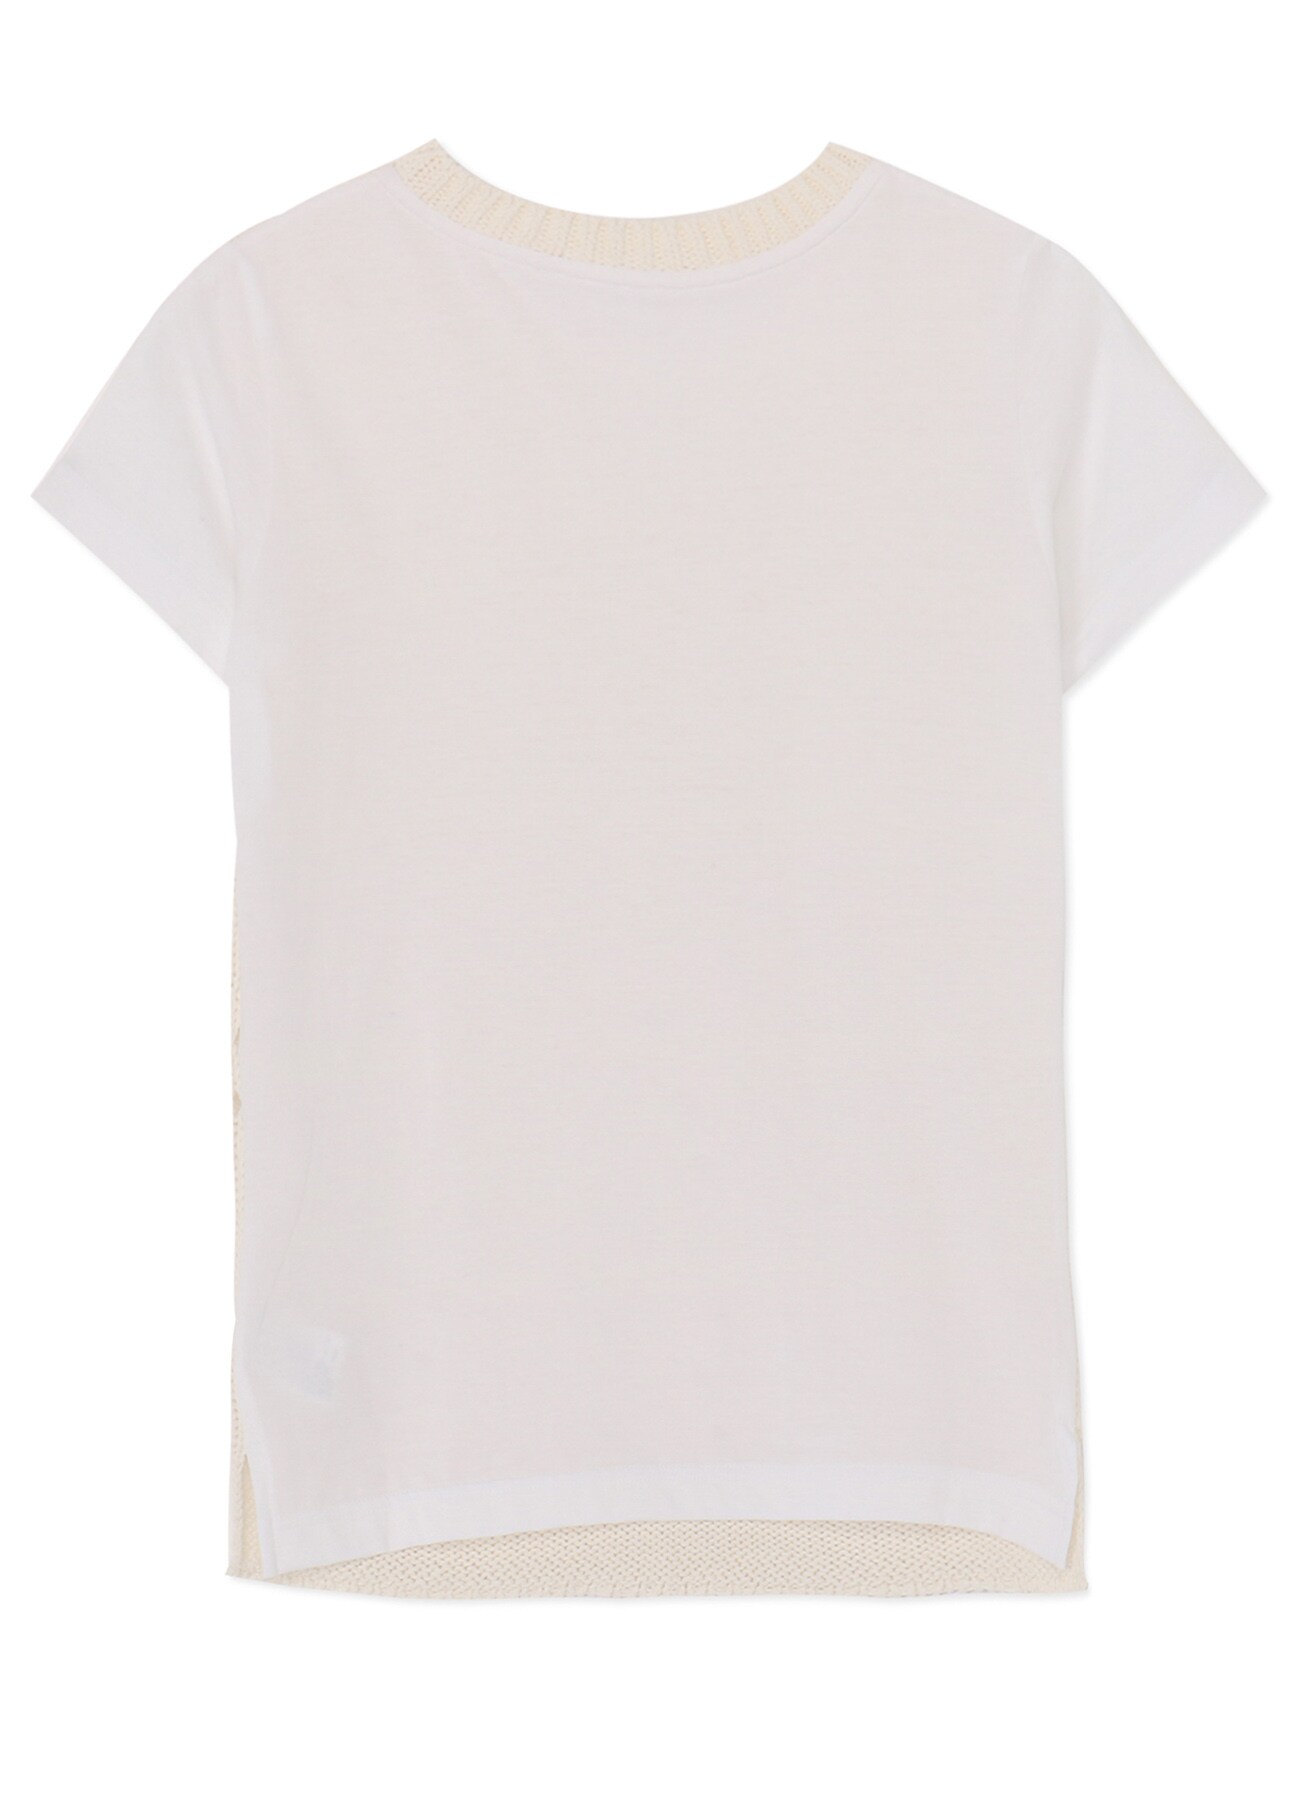 HALF SLEEVE T-SHIRT WITH OPENWORKED KNIT